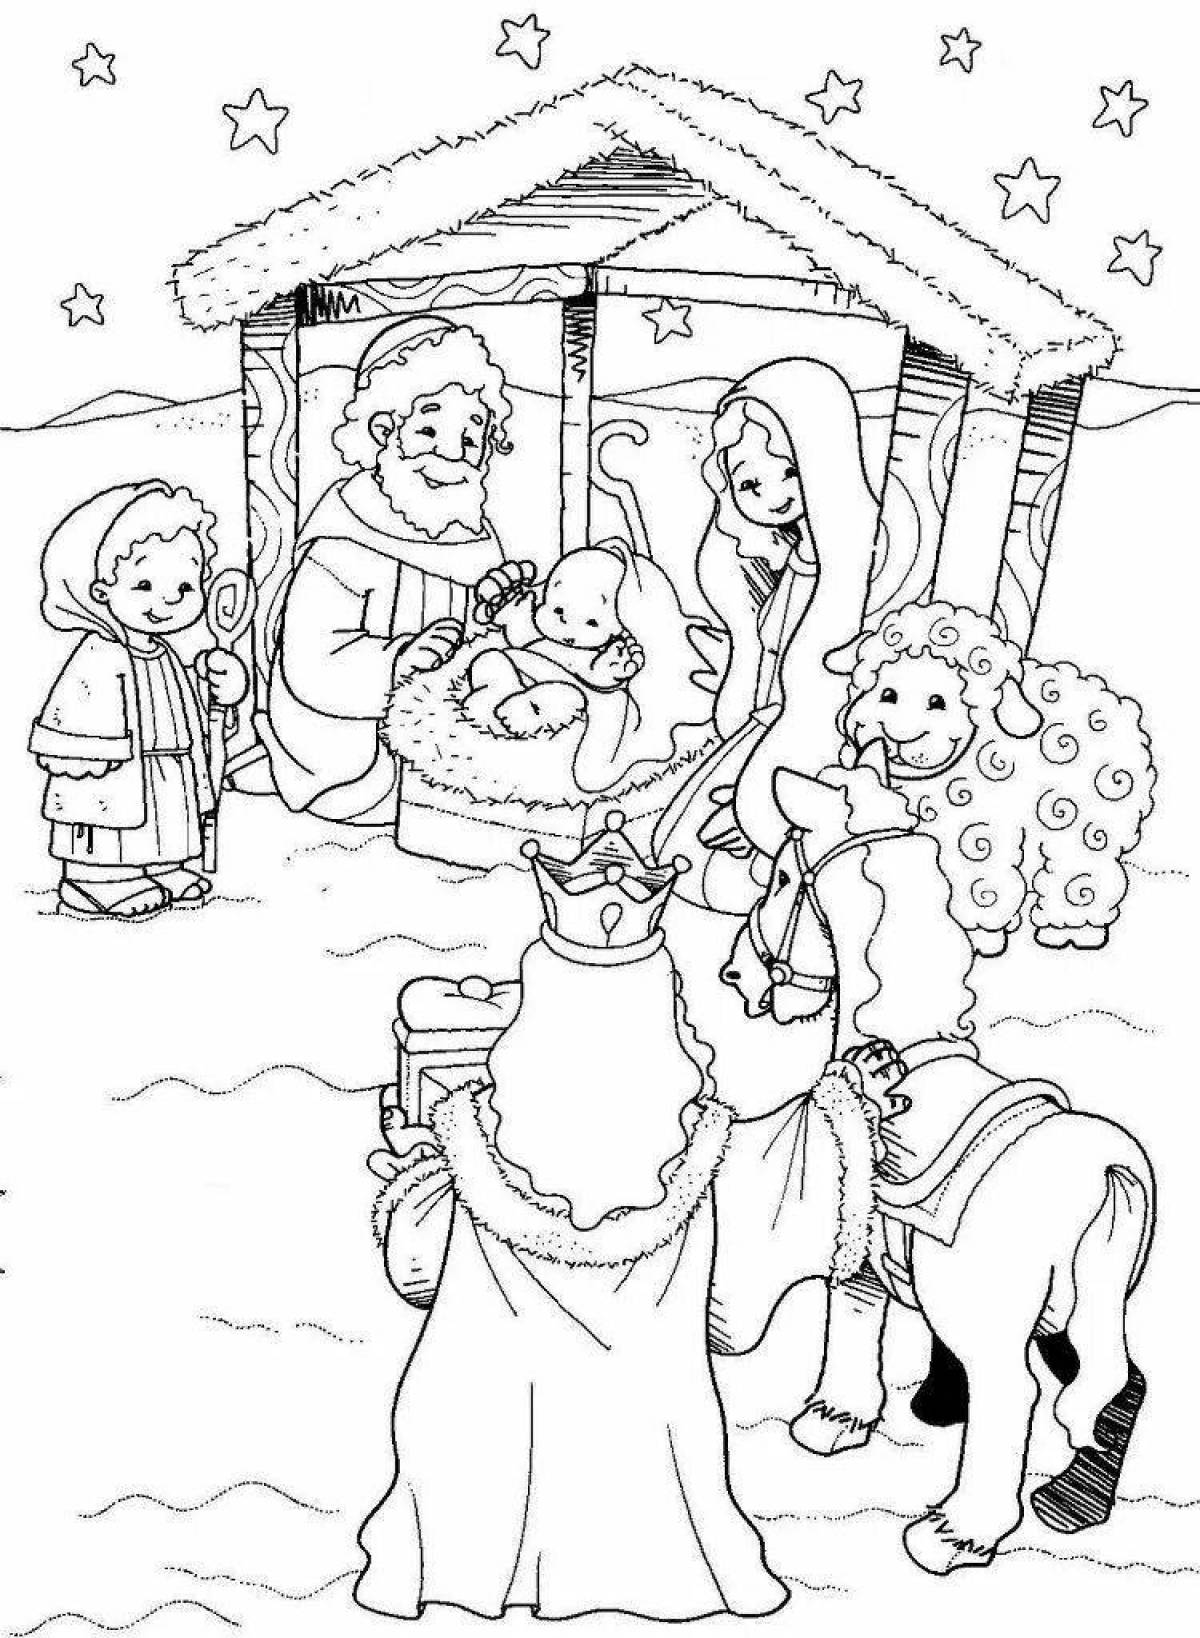 Merry Christmas coloring book for 6-7 year olds